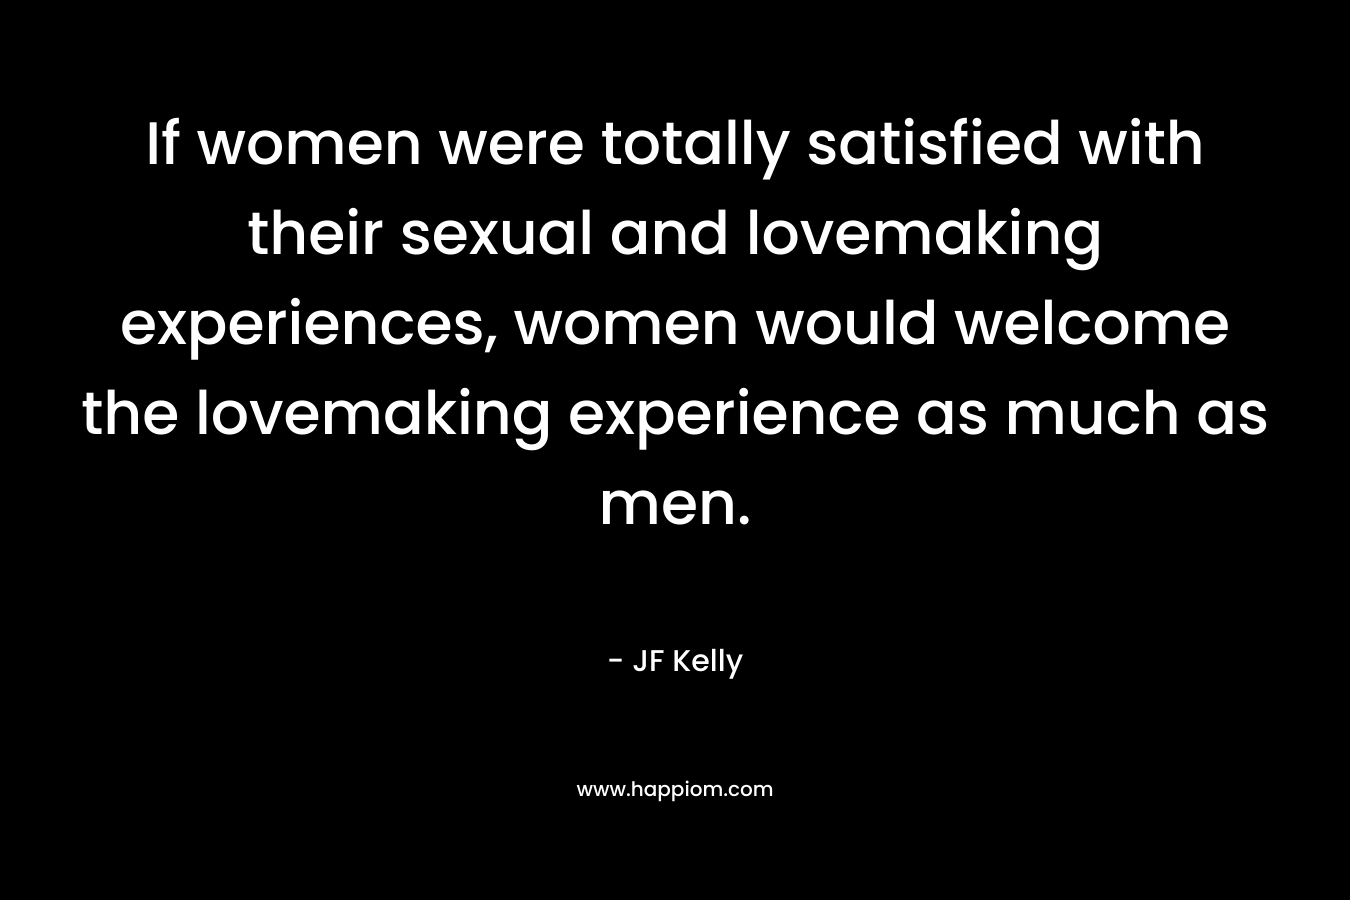 If women were totally satisfied with their sexual and lovemaking experiences, women would welcome the lovemaking experience as much as men. – JF Kelly